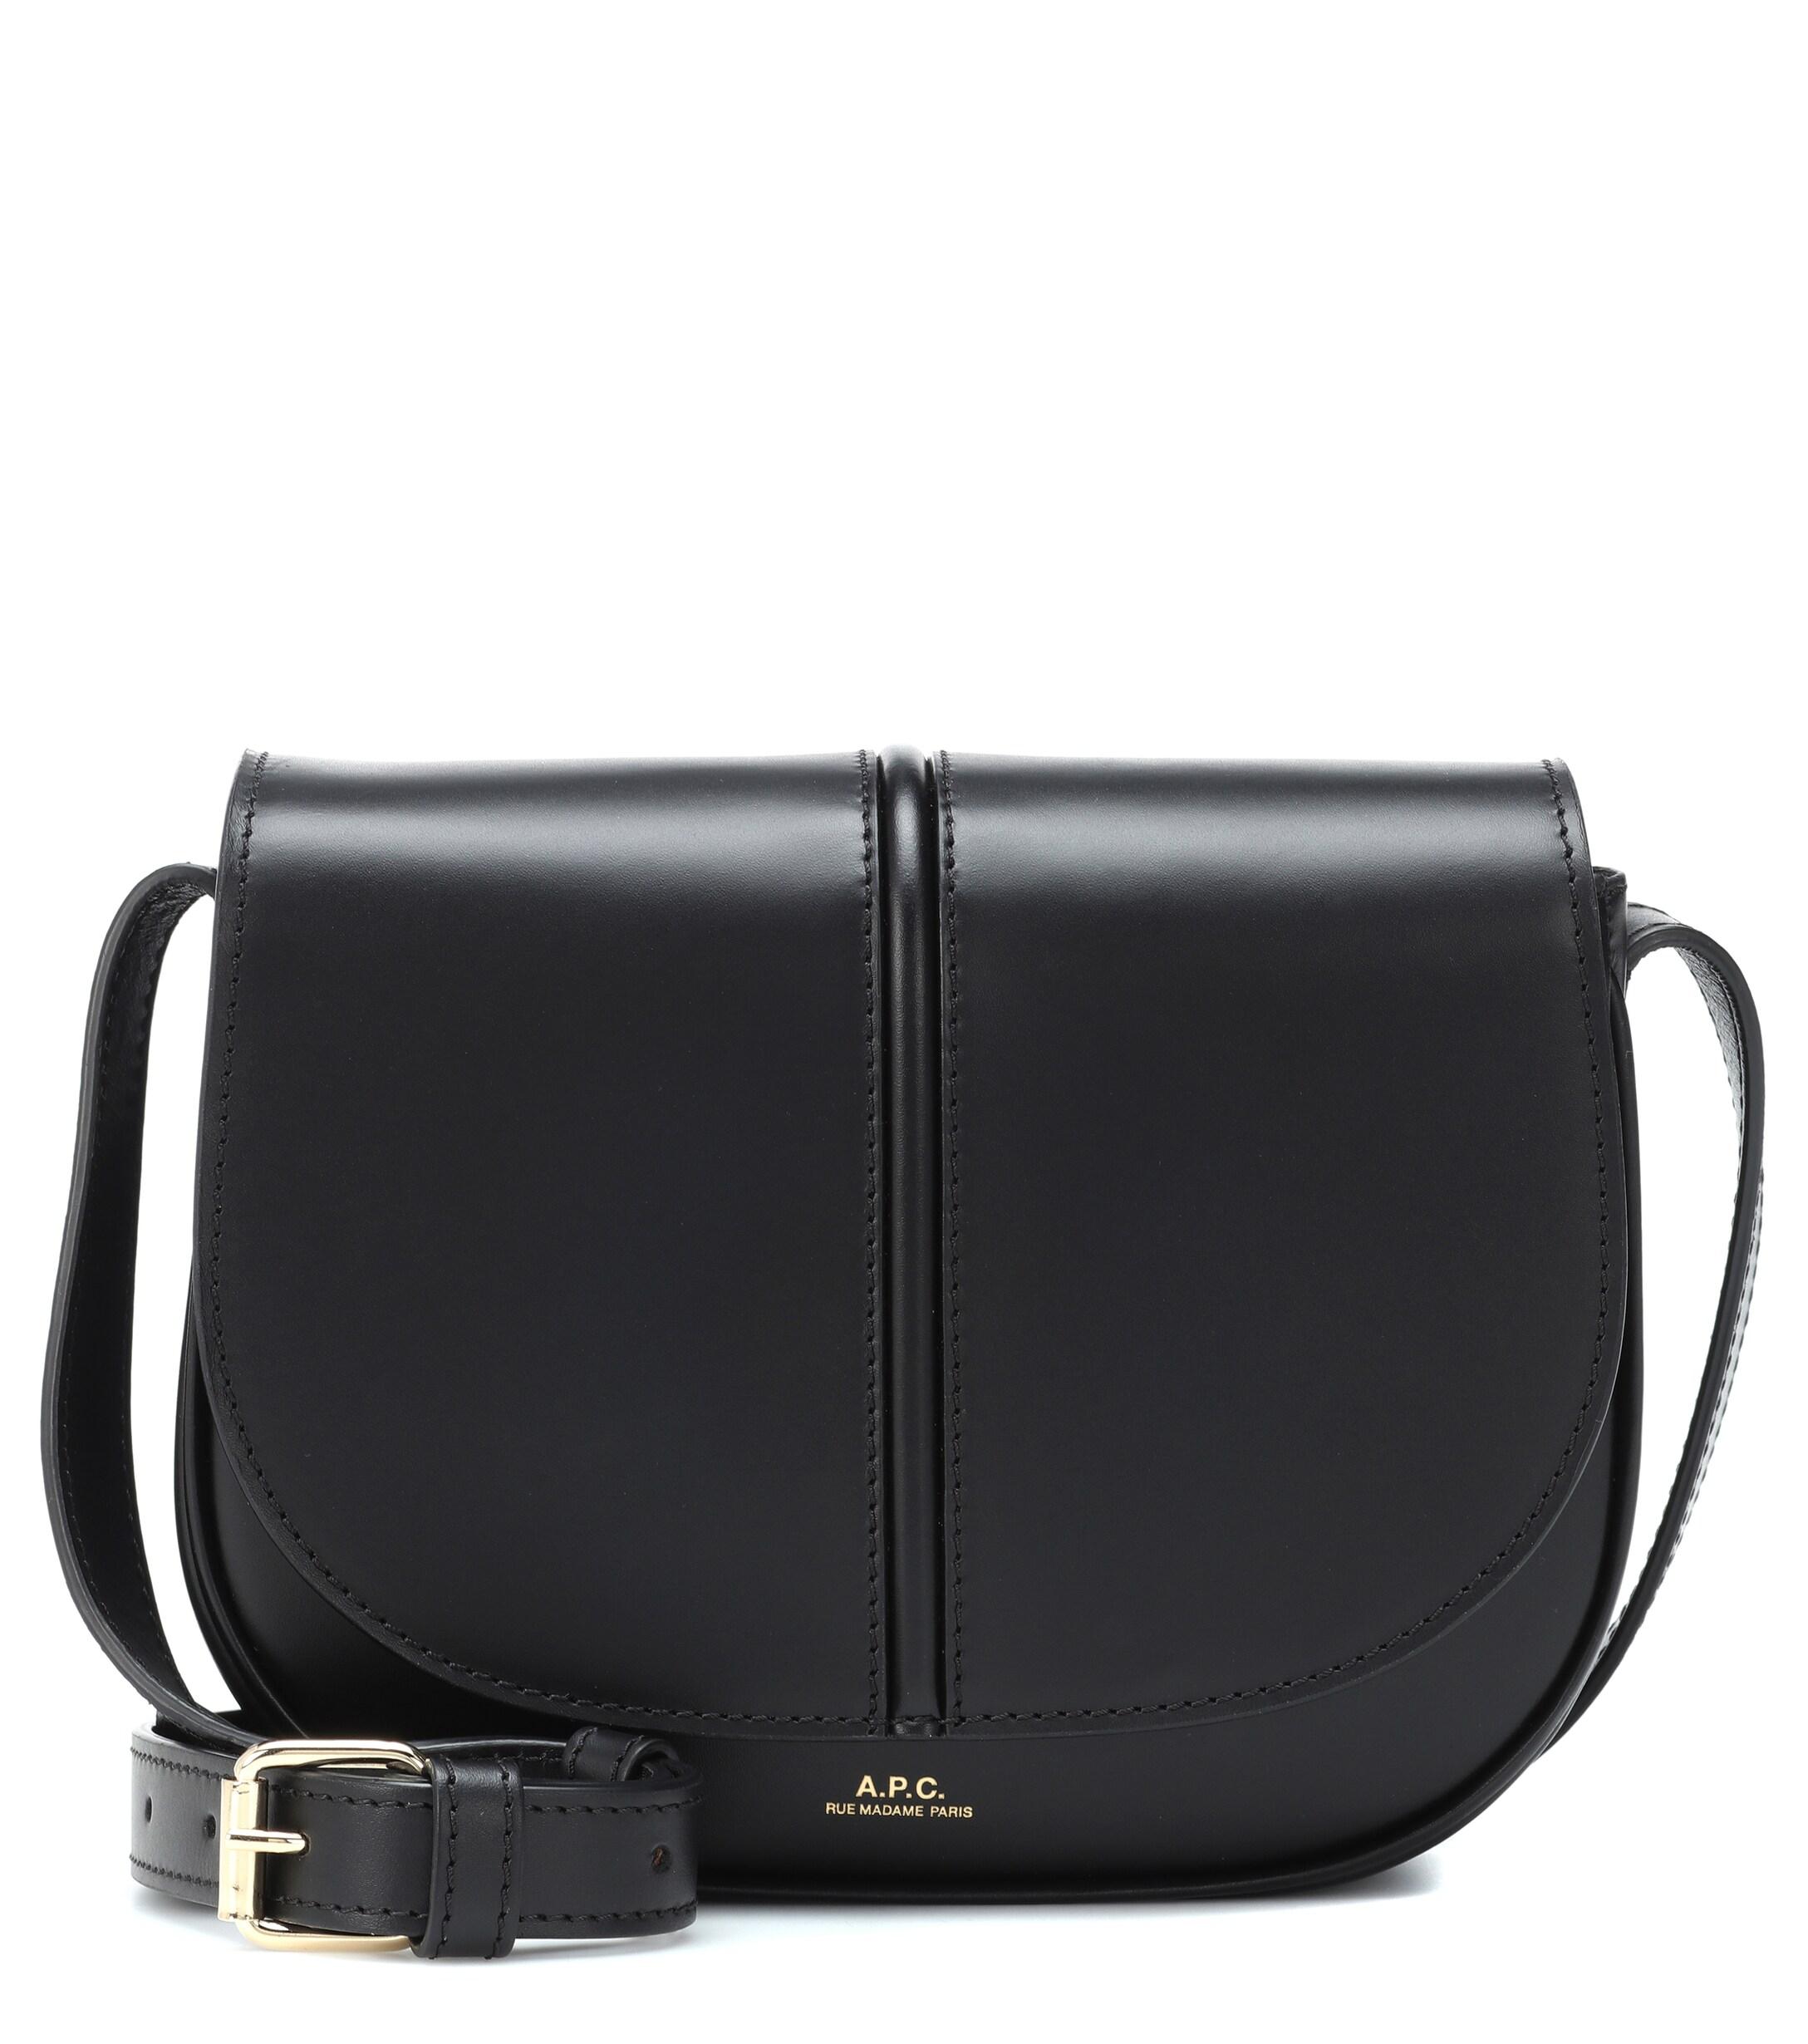 A.P.C. Betty Leather Crossbody Bag in Black - Save 5% - Lyst